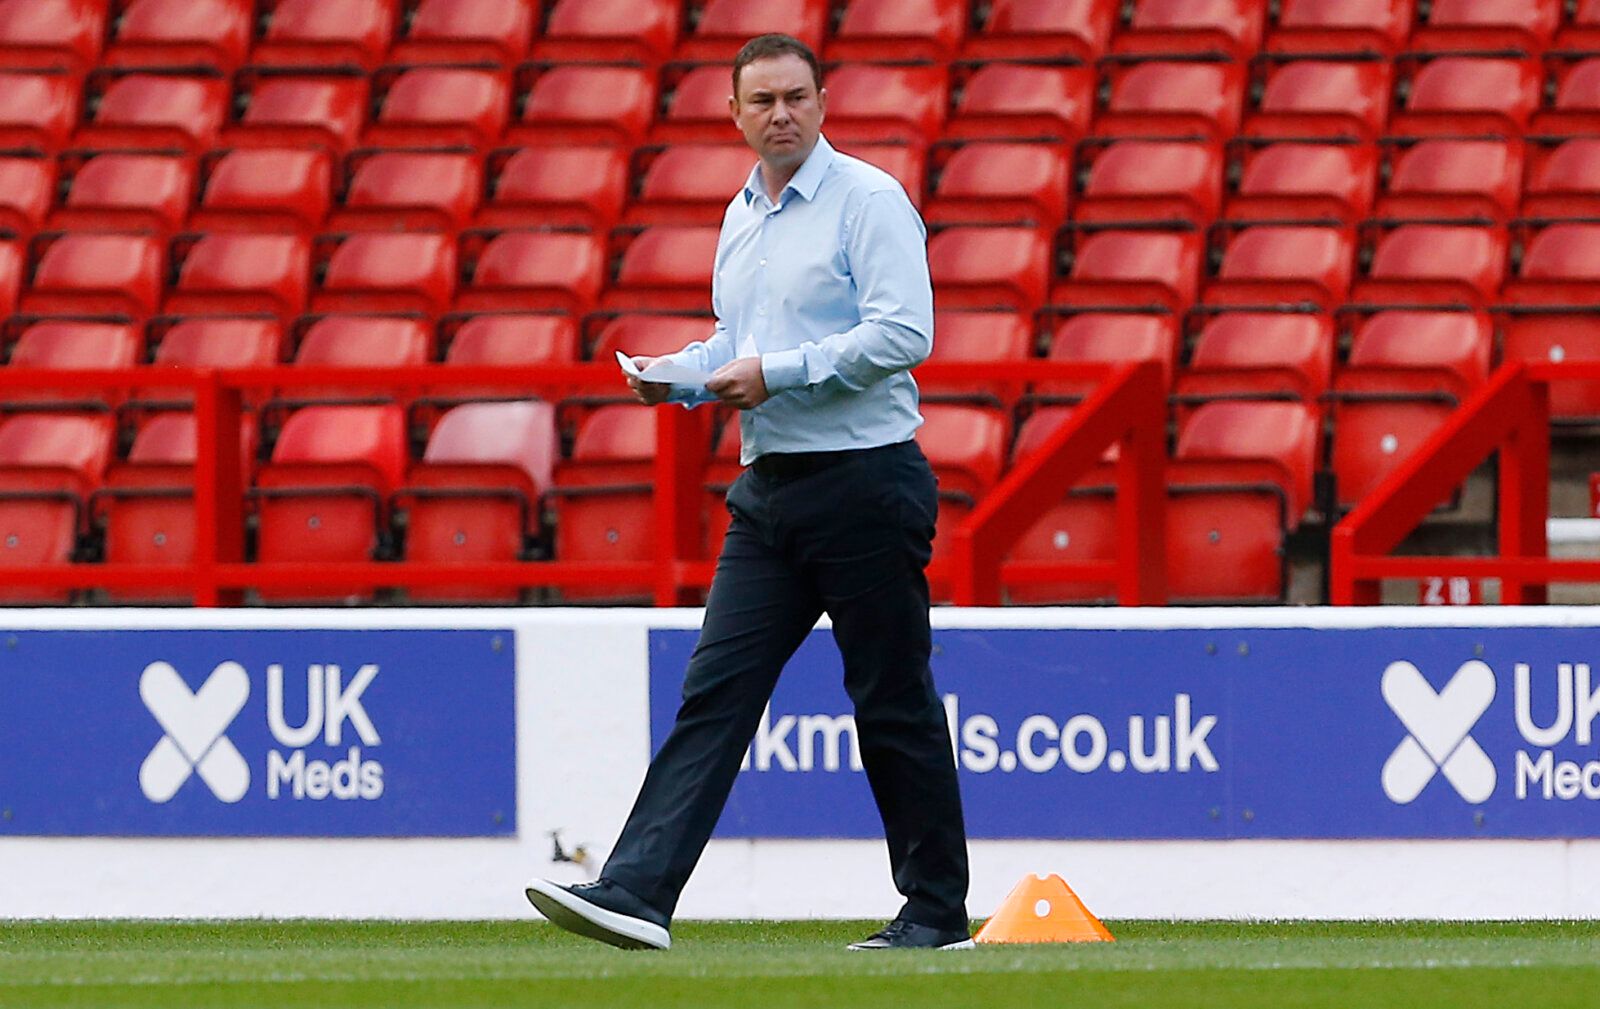 Soccer Football - Carabao Cup - First Round - Nottingham Forest v Bradford City - The City Ground, Nottingham, Britain - August 11, 2021 Bradford City manager Derek Adams on the pitch before the match Action Images/Craig Brough EDITORIAL USE ONLY. No use with unauthorized audio, video, data, fixture lists, club/league logos or 'live' services. Online in-match use limited to 75 images, no video emulation. No use in betting, games or single club /league/player publications.  Please contact your ac